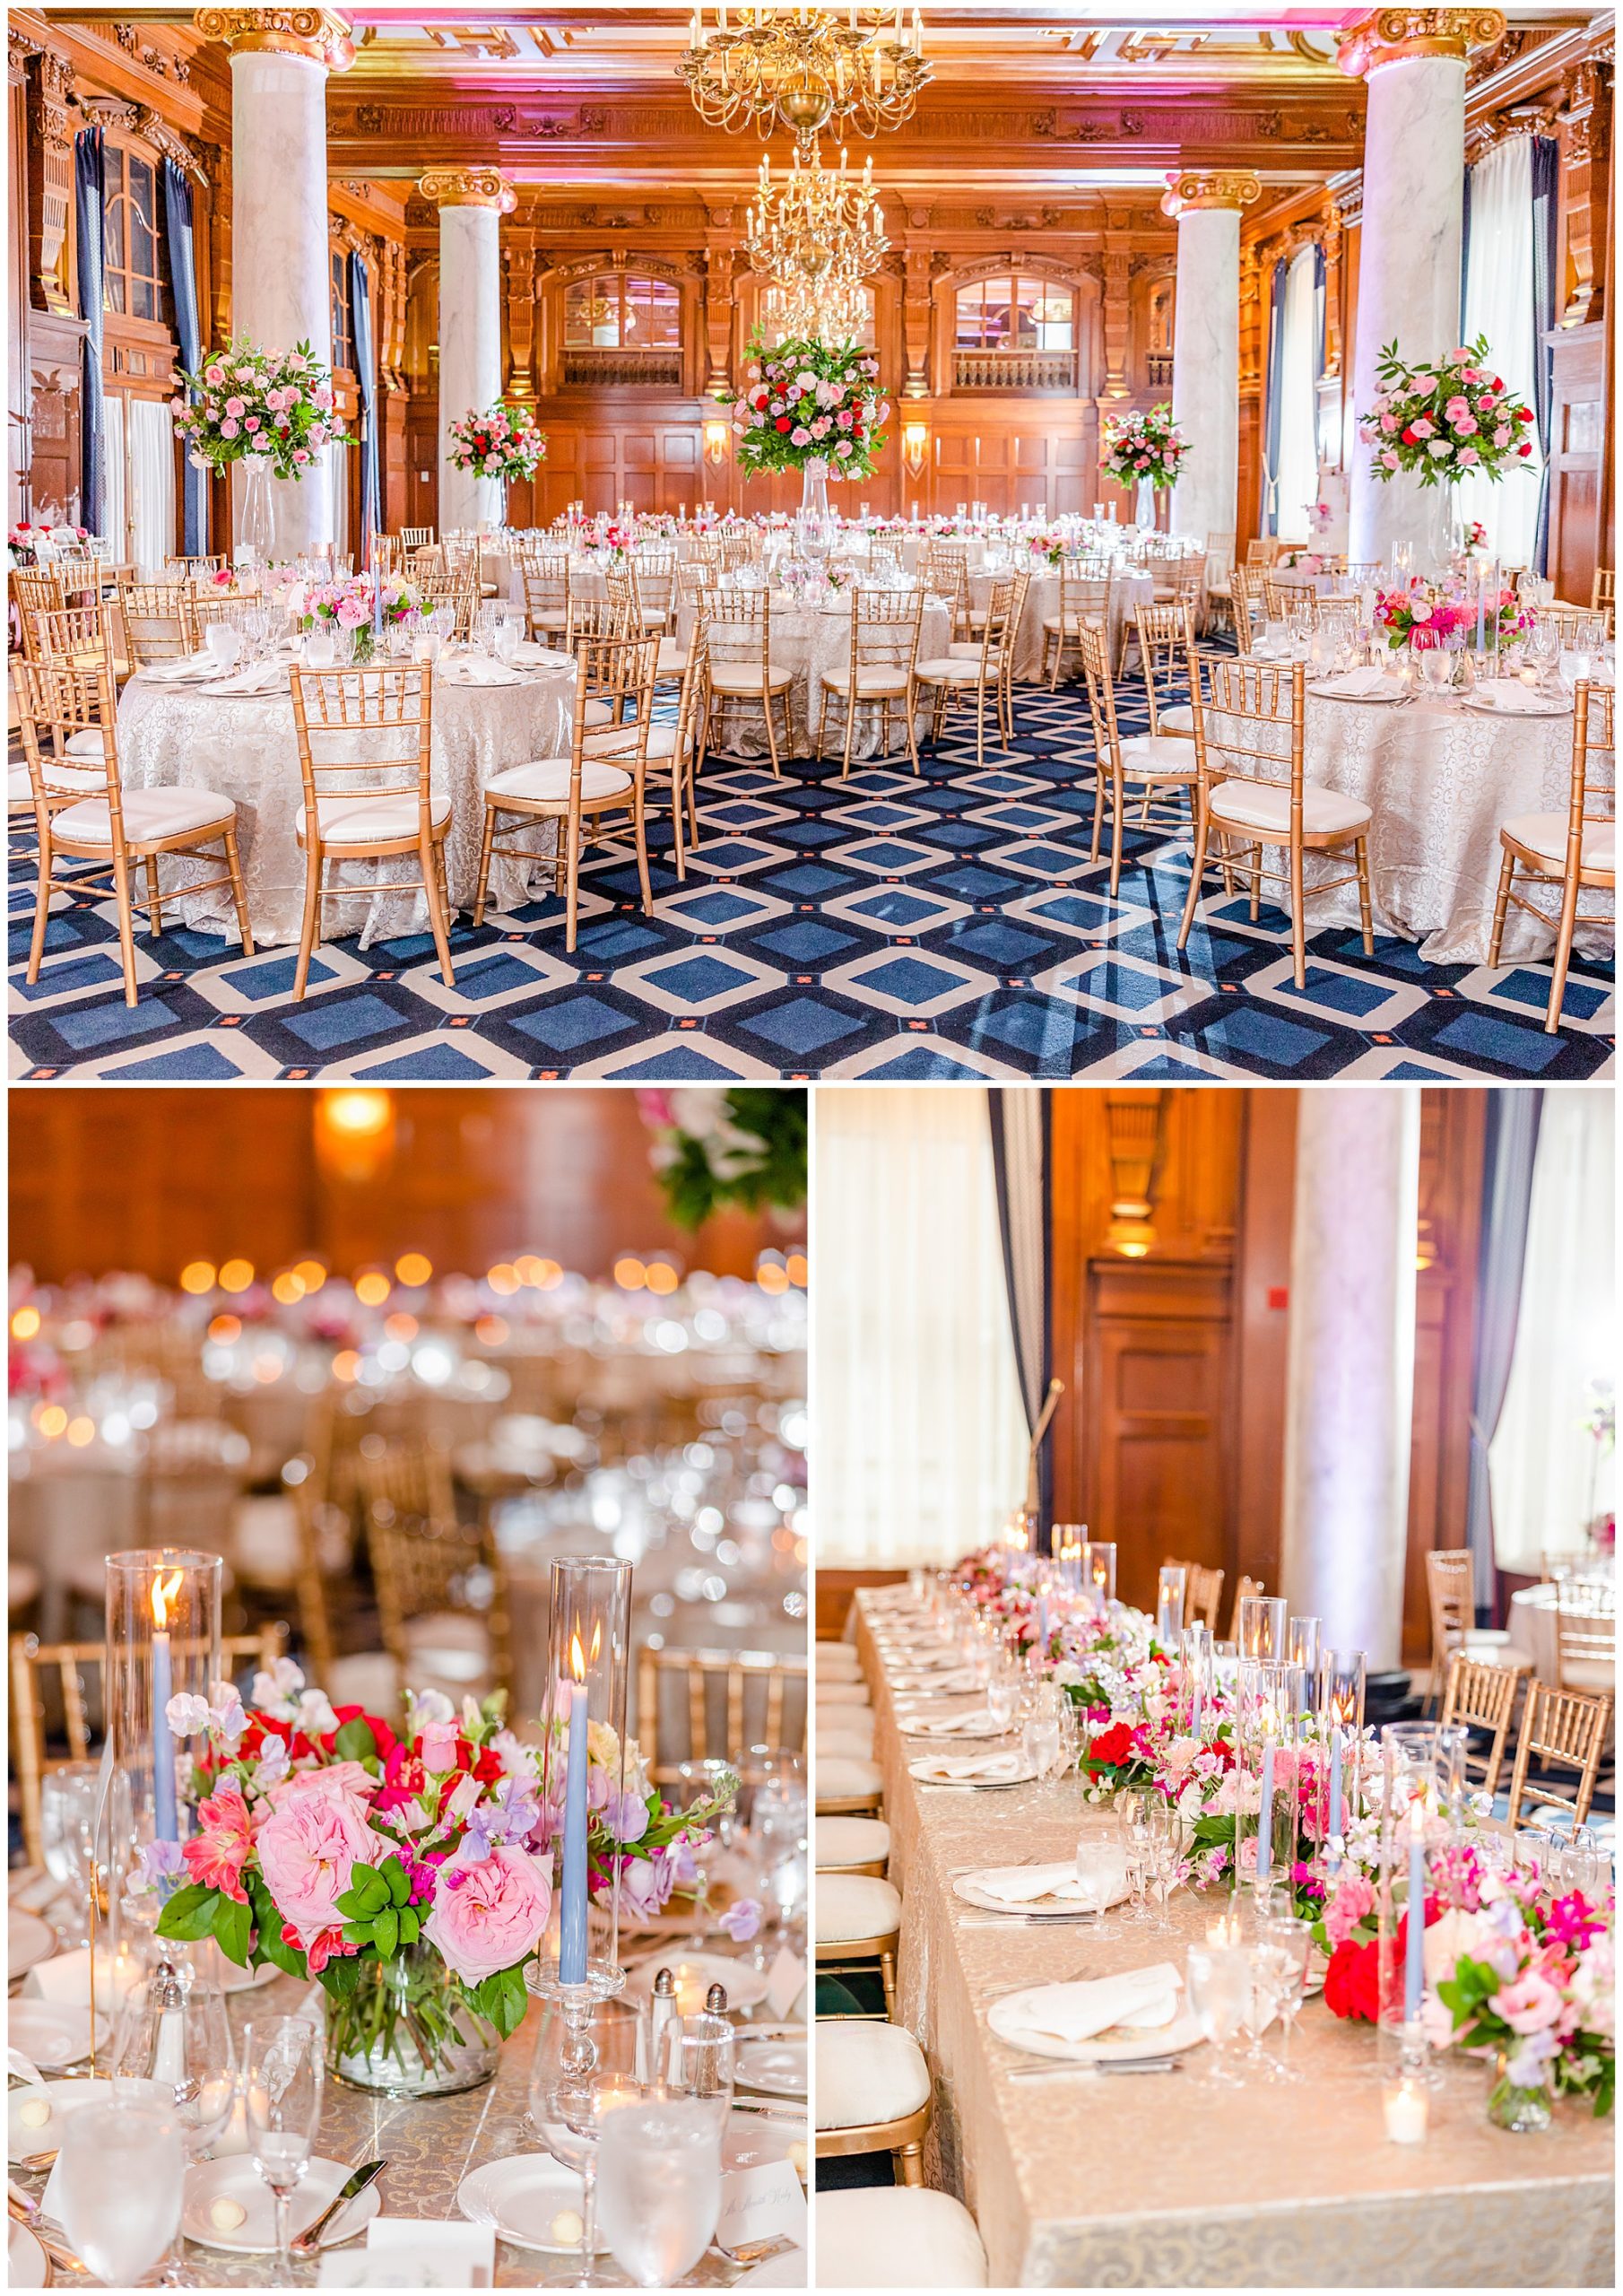 elegant French blue Willard Intercontinental wedding, DC wedding, elegent DC wedding, luxury DC wedding venue, high end DC wedding venue, DC wedding photographer, spring wedding aesthetic, spring wedding ideas, classic DC wedding, classic wedding ideas, Rachel E.H. Photography, French blue aesthetic, floral focused wedding reception, Victoria Clausen Floral Events, peony and rose reception florals